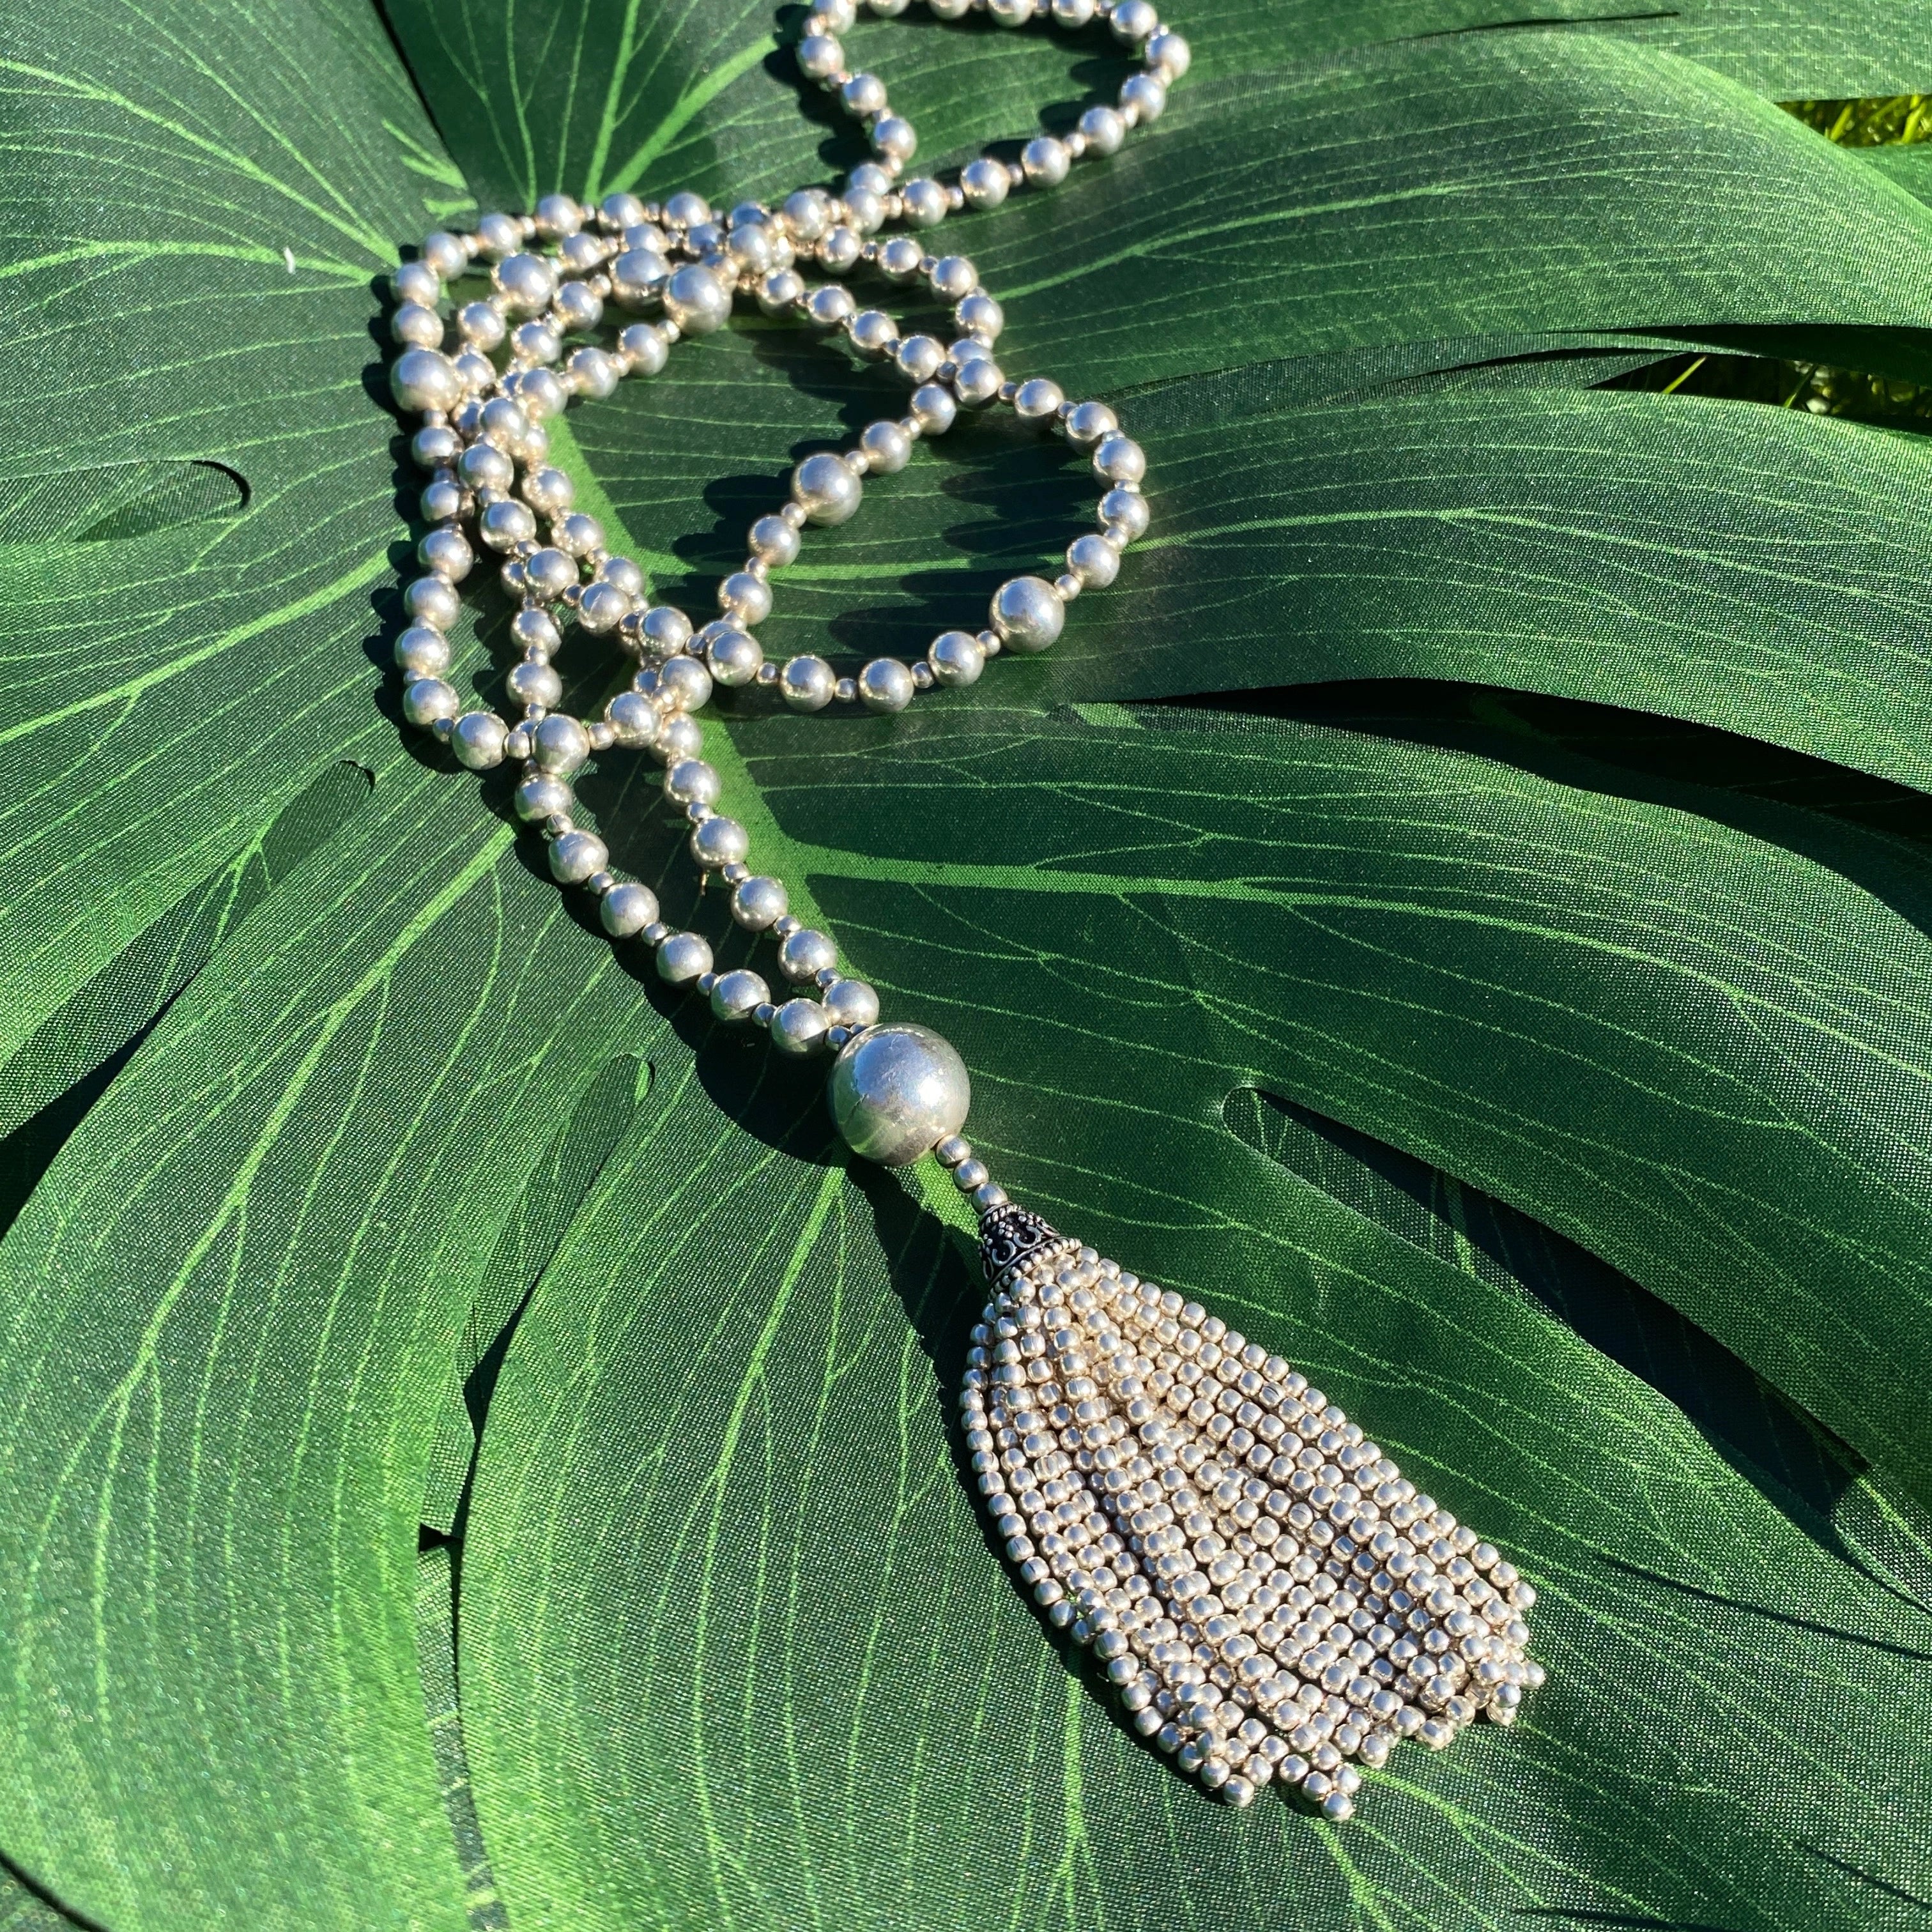 Pretty Silver Necklace - Tassel Necklace - Long Necklace - $16.00 - Lulus